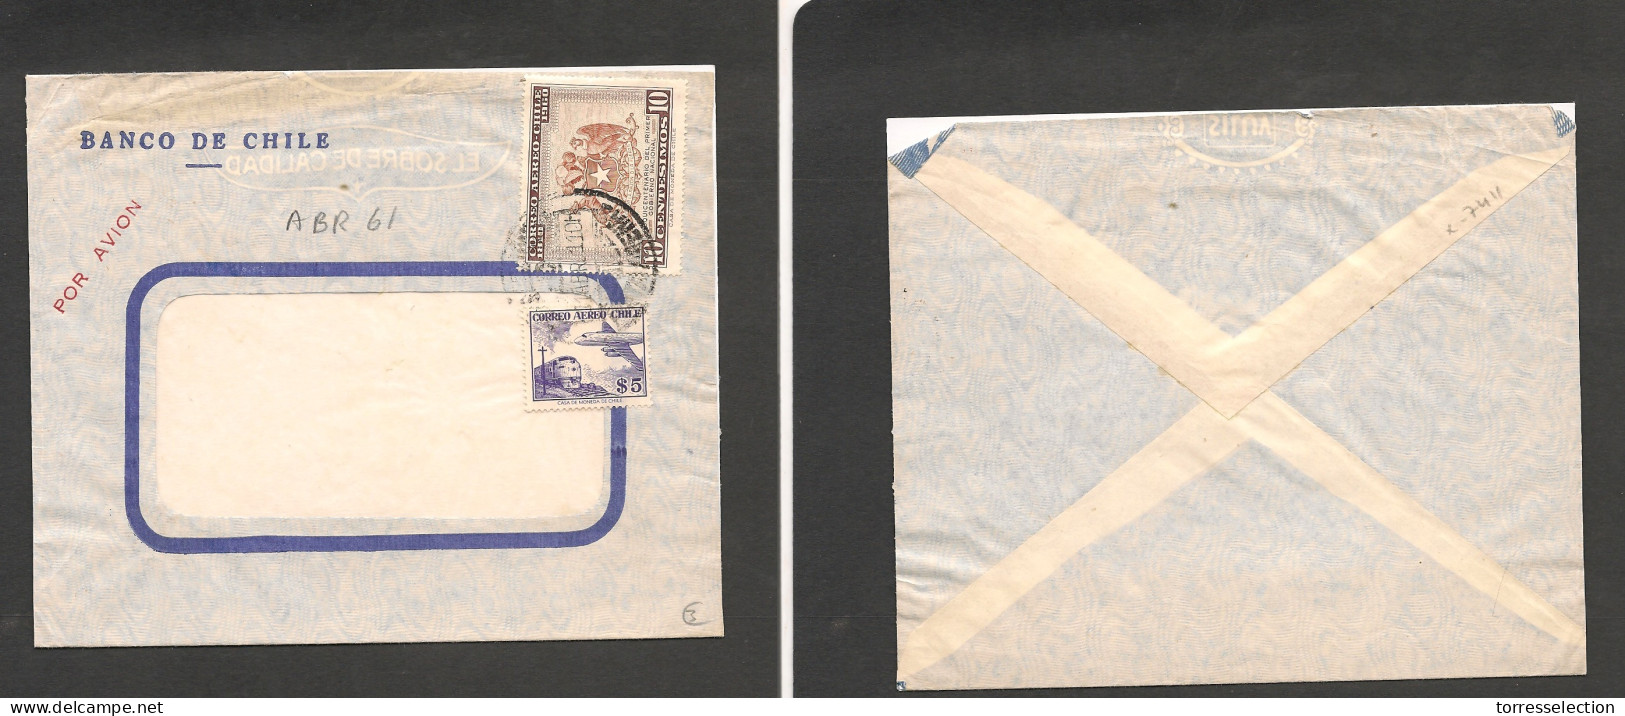 CHILE. Chile - Cover -1961 11 Abr Stgo To USA? Air Fkd Env $15 Rate Ex-Prof West UK Airmails Coll.- . Easy Deal. - Cile